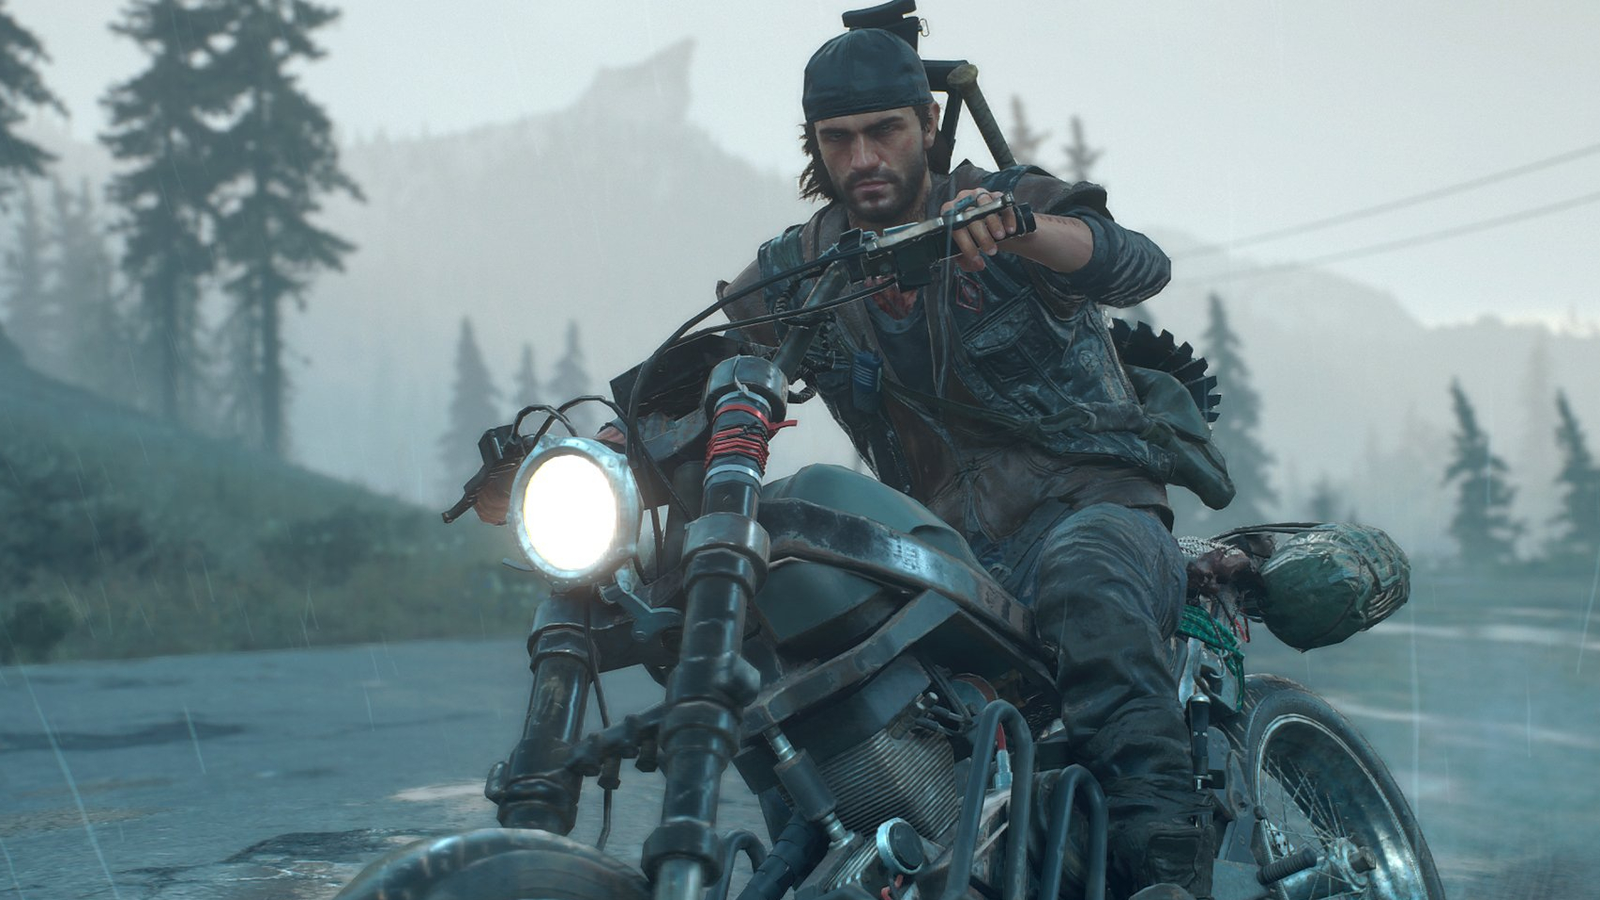 Days Gone Director Hints That A Sequel Could Be In The Works